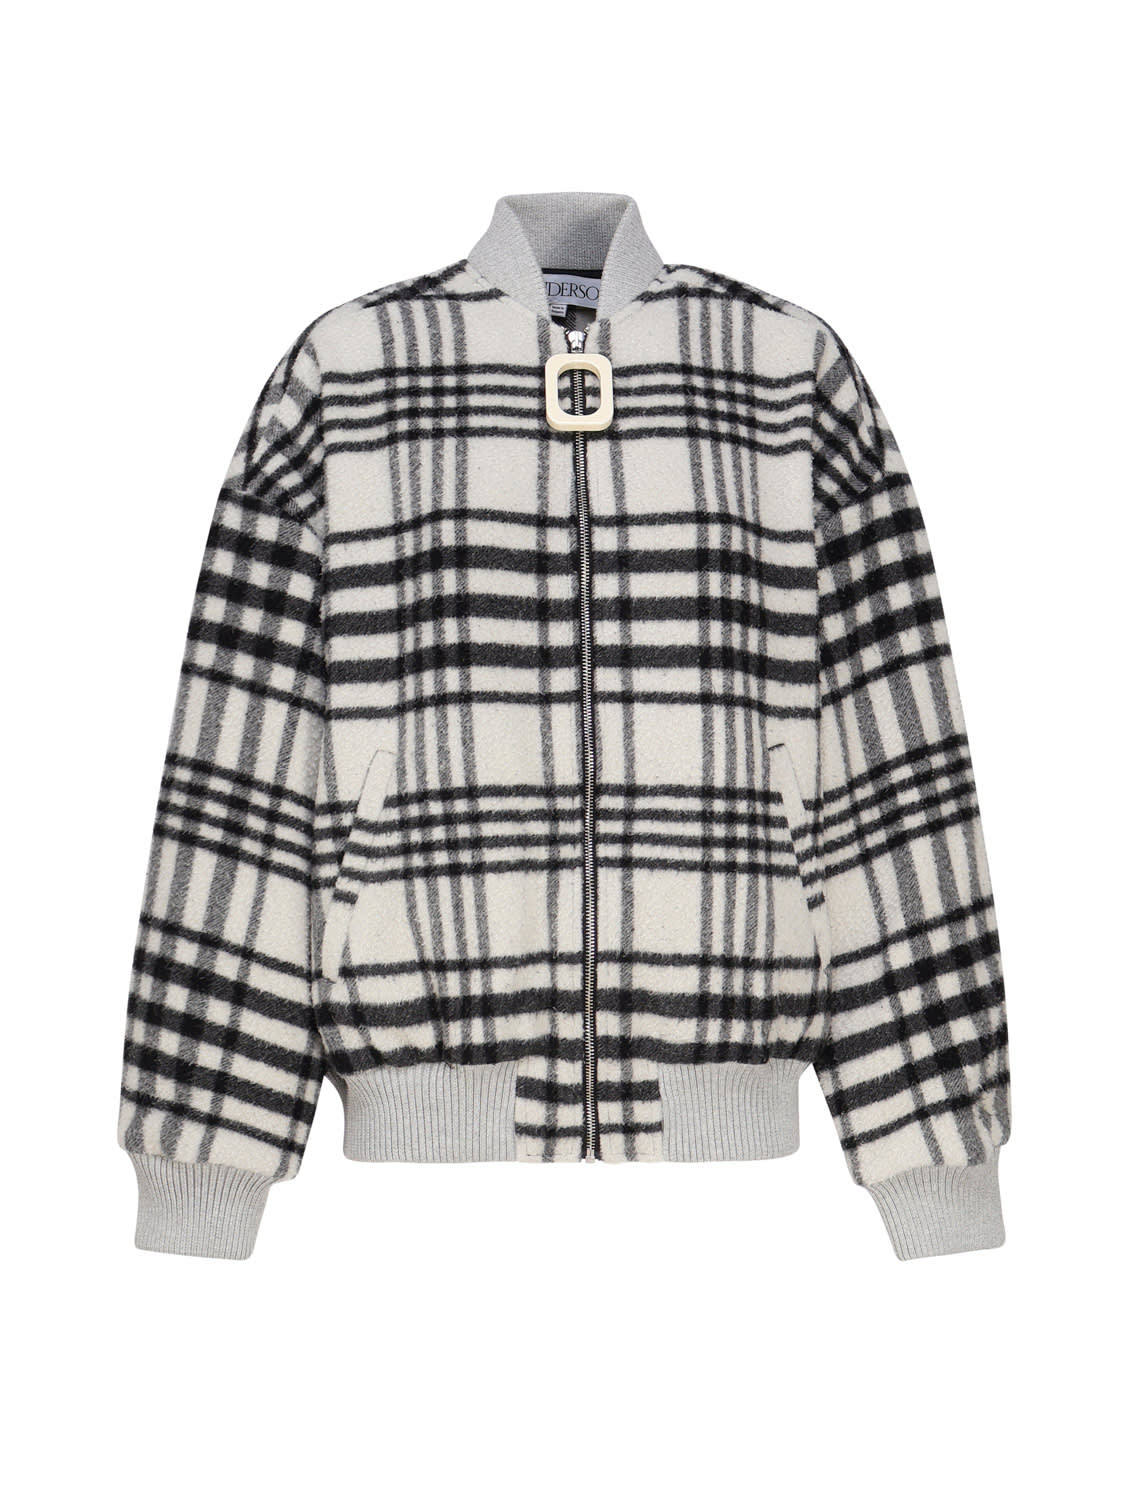 J.W. Anderson Check Bomber Jacket